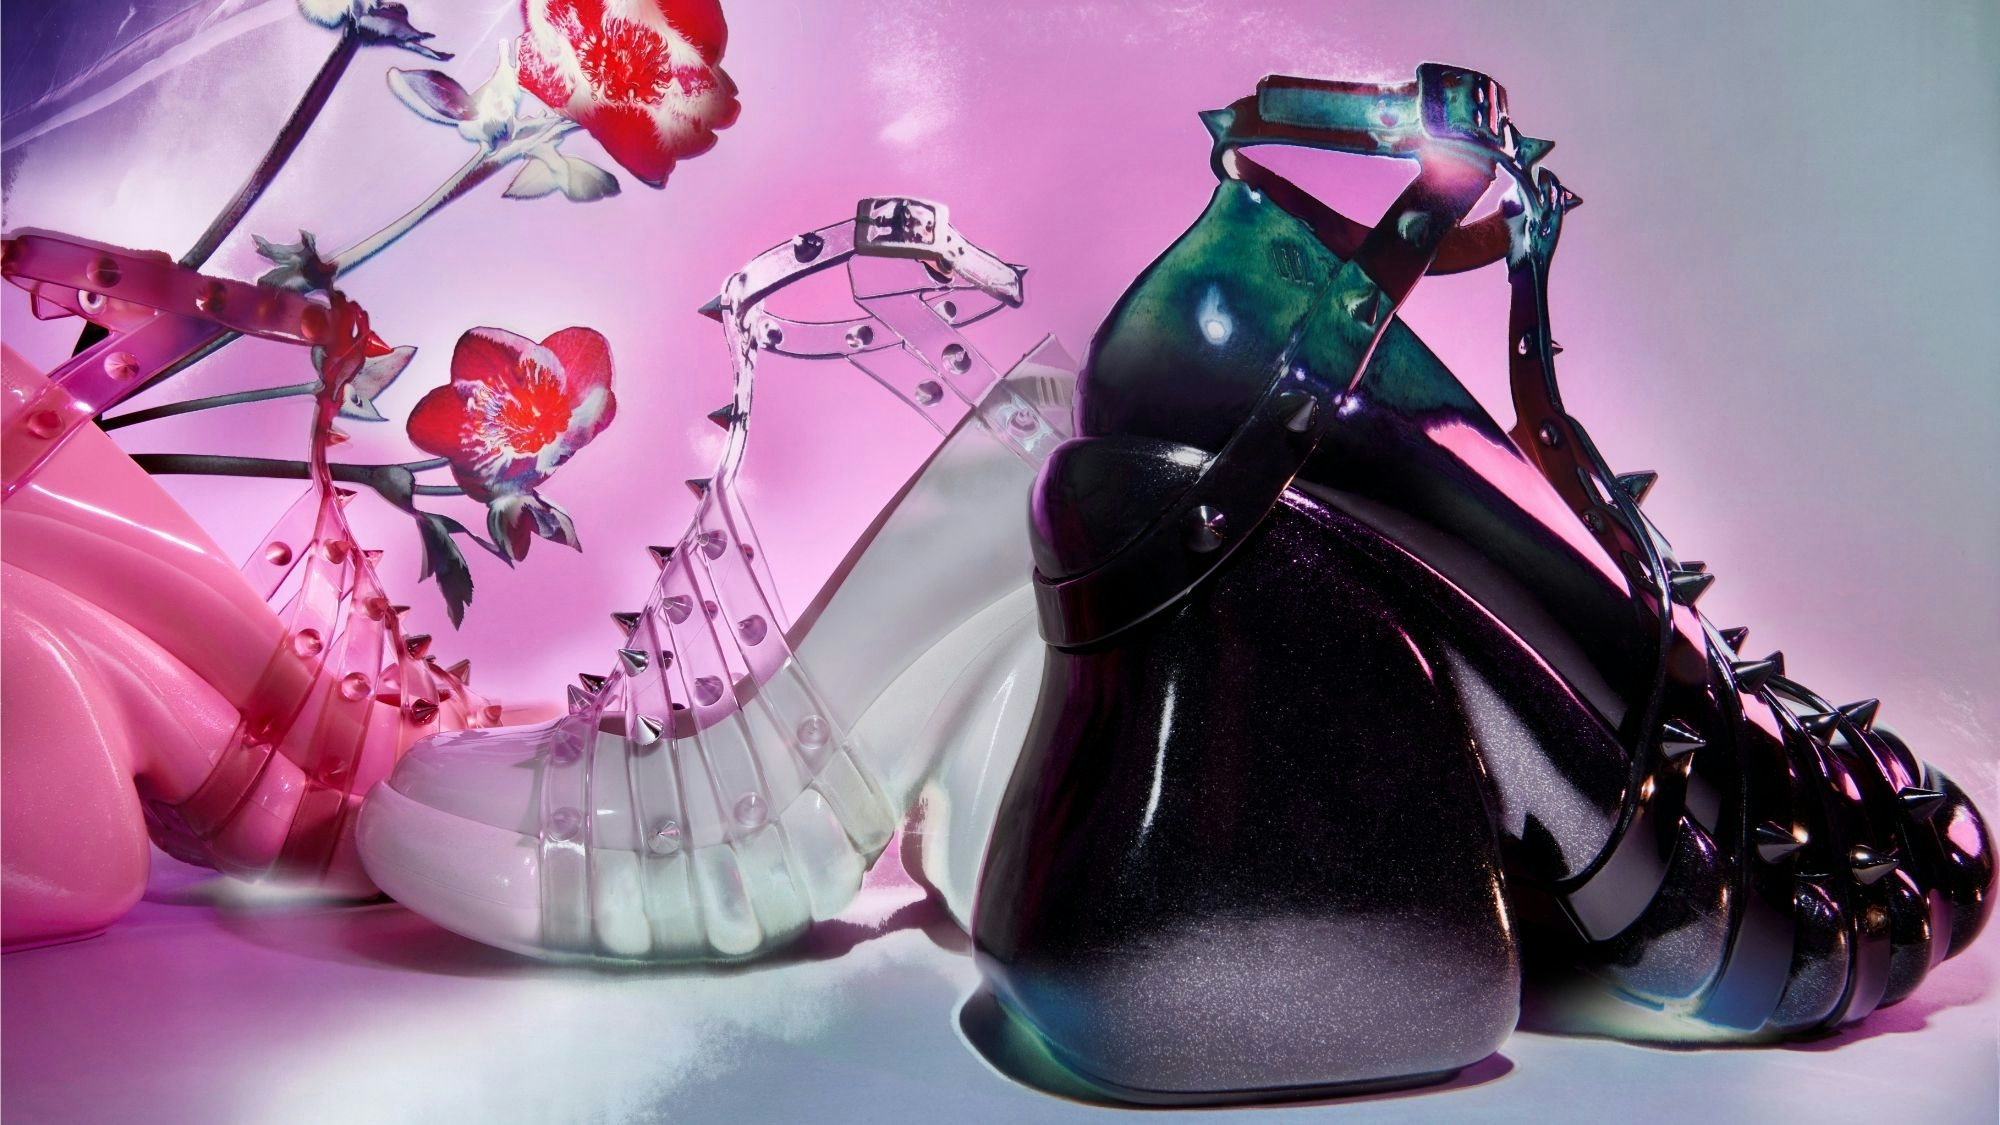 Having worked together before, Melissa and JPG resurrect their jelly footwear favorite. Photo: Jean Paul Gaultier x Melissa